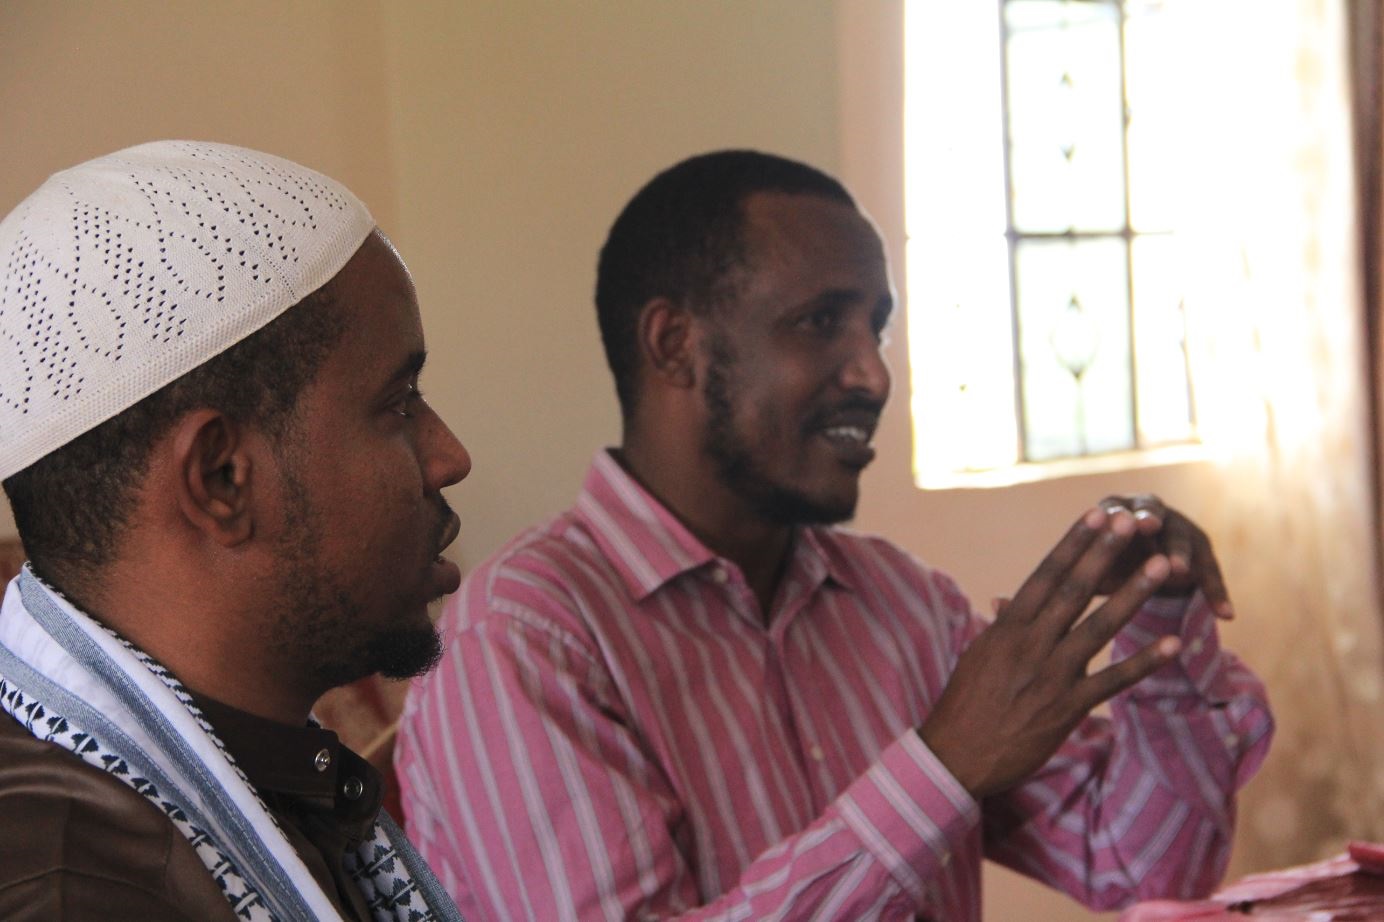 03_Hassan (right) makes a point during the induction of the Mandera programme team. Photo credit - Interpeace